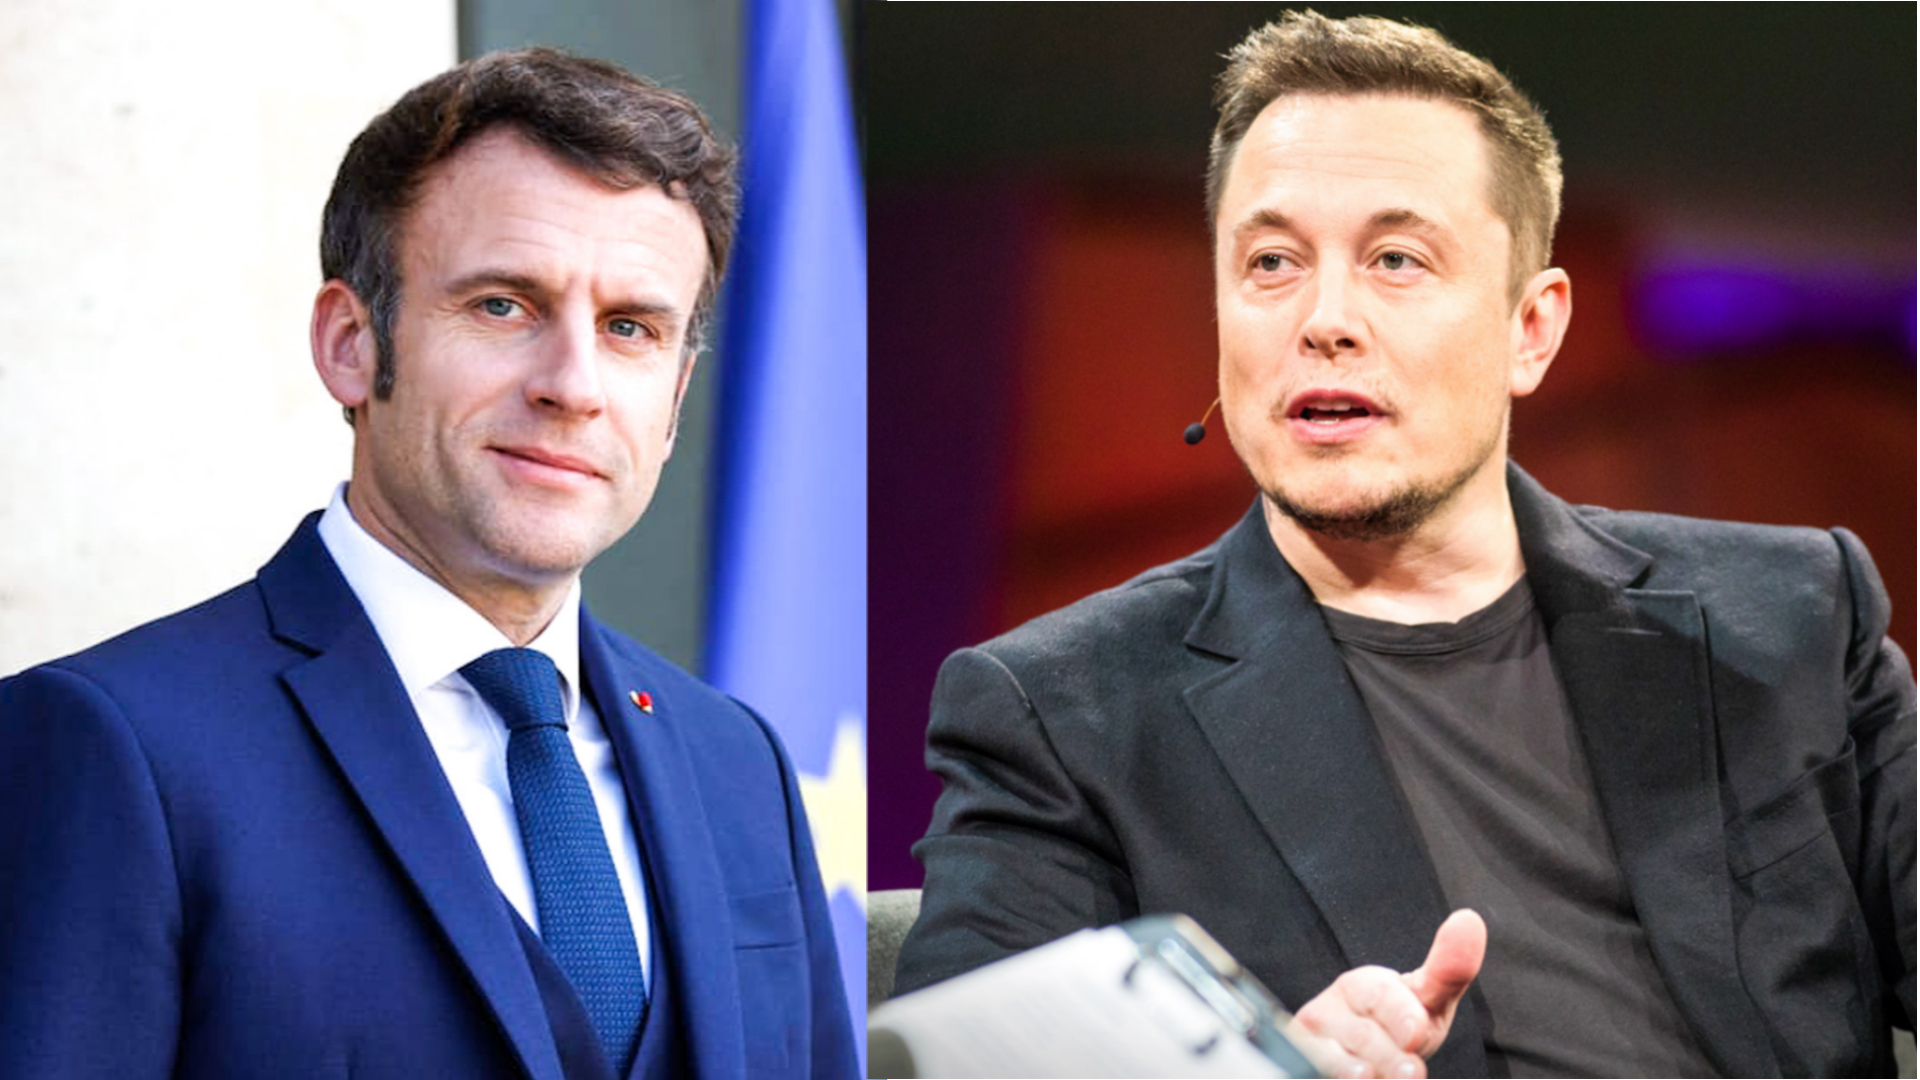 Emmanuel Macron tells Elon Musk of the need for Twitter to comply with European moderation rules